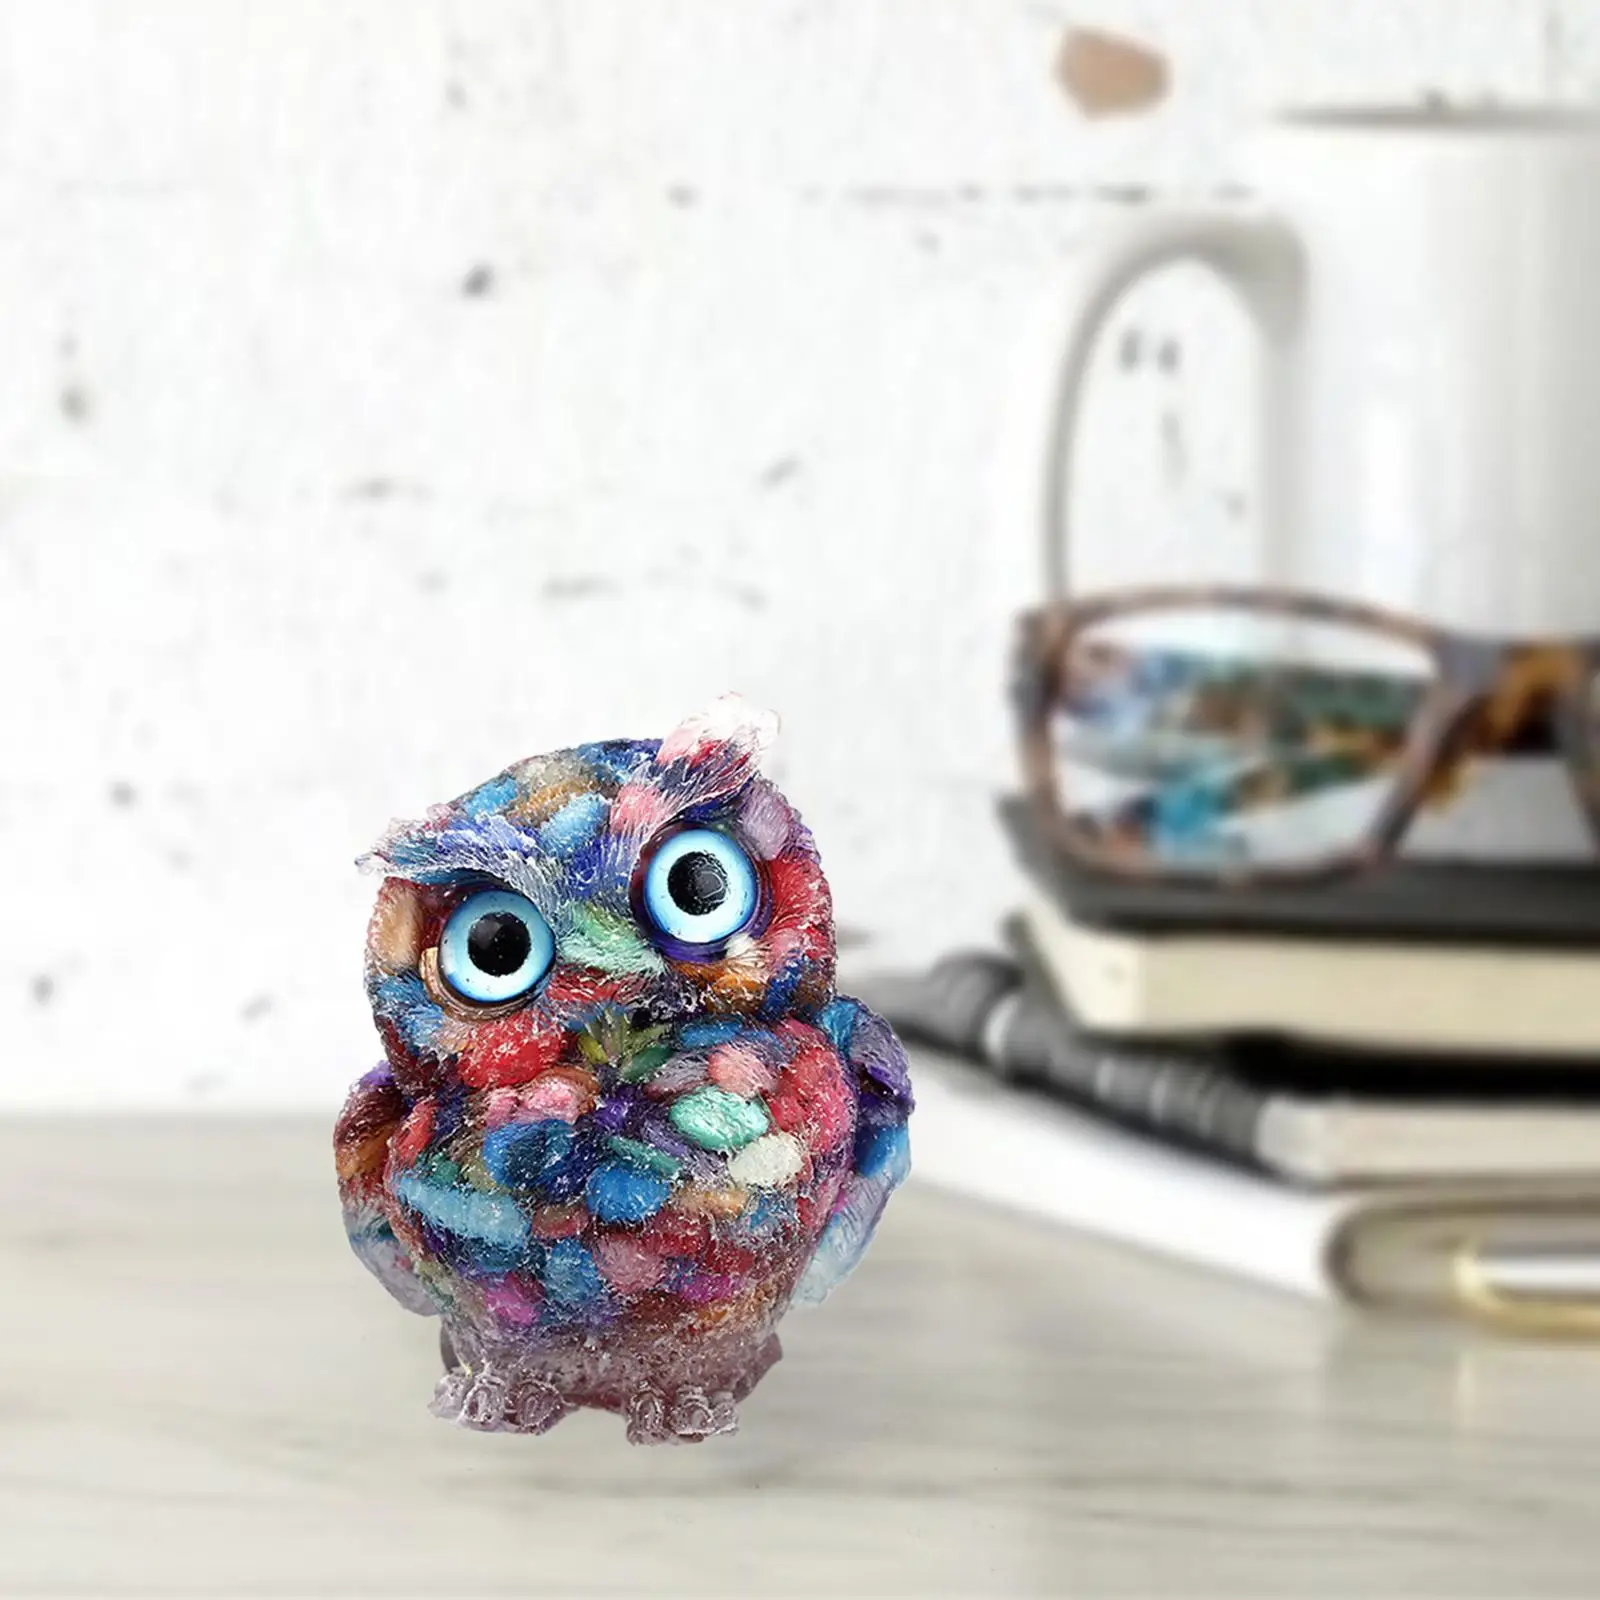 3D Owl Figurines Collectible Home Decor DIY Owl Bird Statue Animal Sculpture for Stand Bedroom Tabletop Decorative